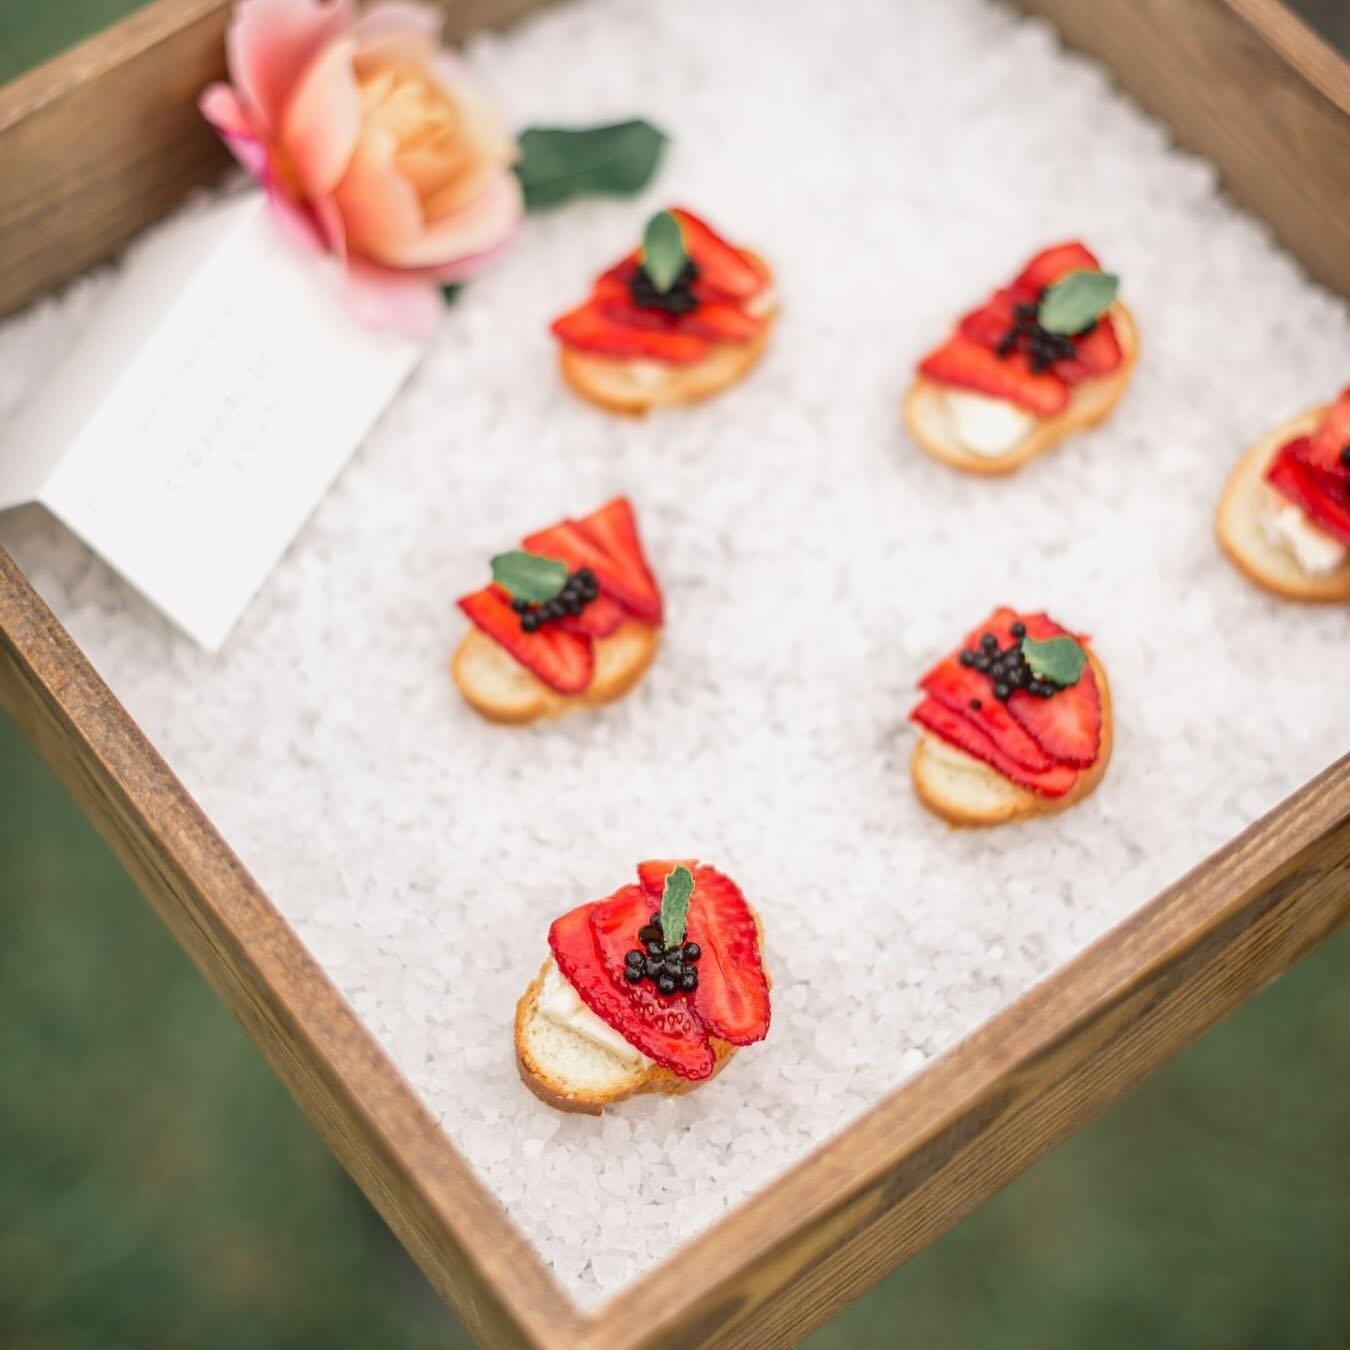 Passed hors d&rsquo;oeuvres your guests won't be able to pass up. 👌 ⁣
⁣
📸: @brandonlataphoto